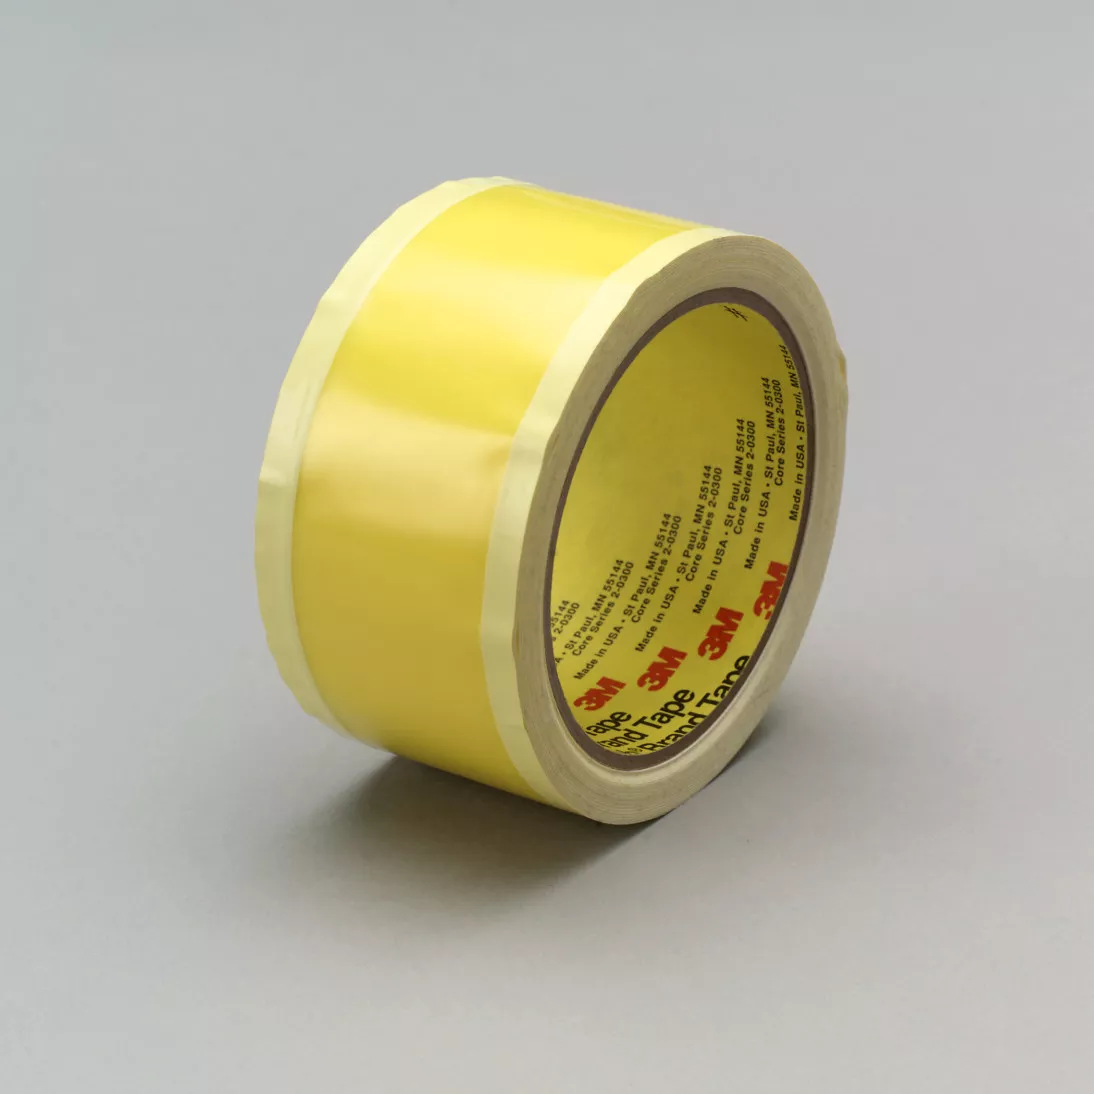 3M™ Riveters Tape 695, Yellow with White Adhesive, 2 in x 36 yd, 3 mil,
24 rolls per case